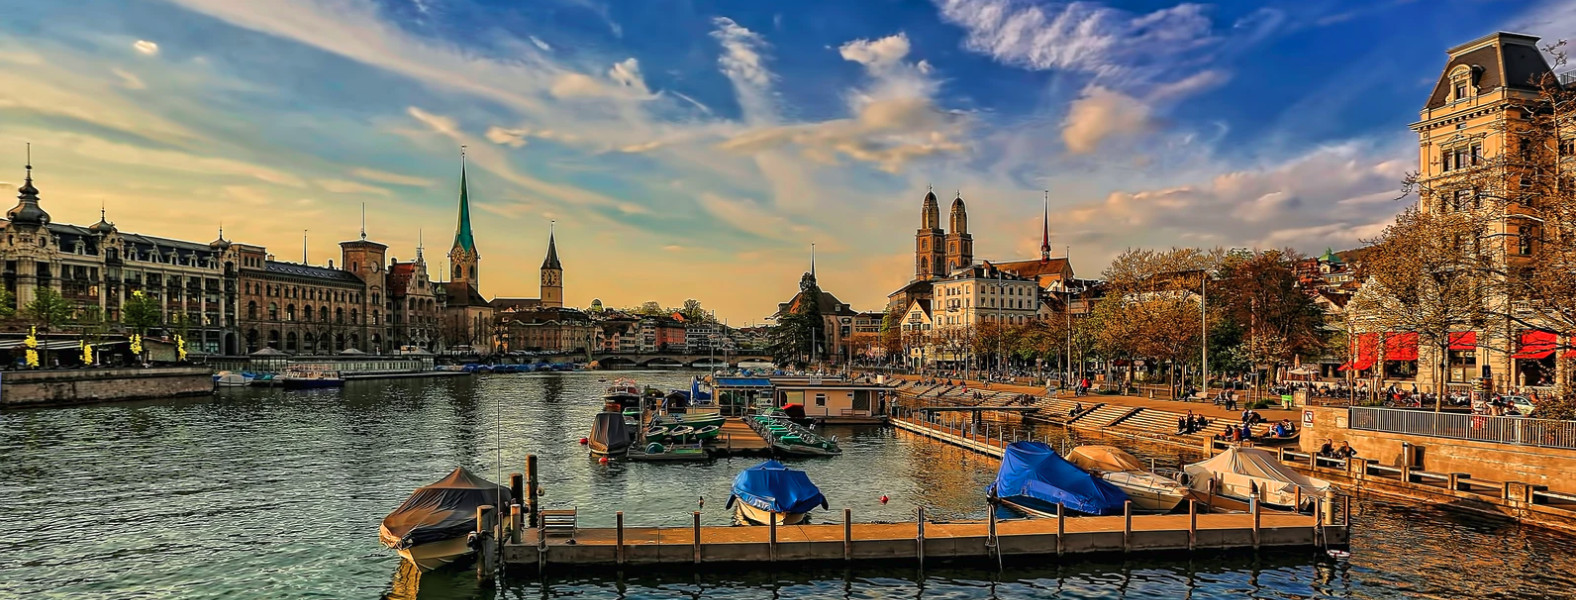 HousingAnywhere Most Expensive Cities In The World Zurich